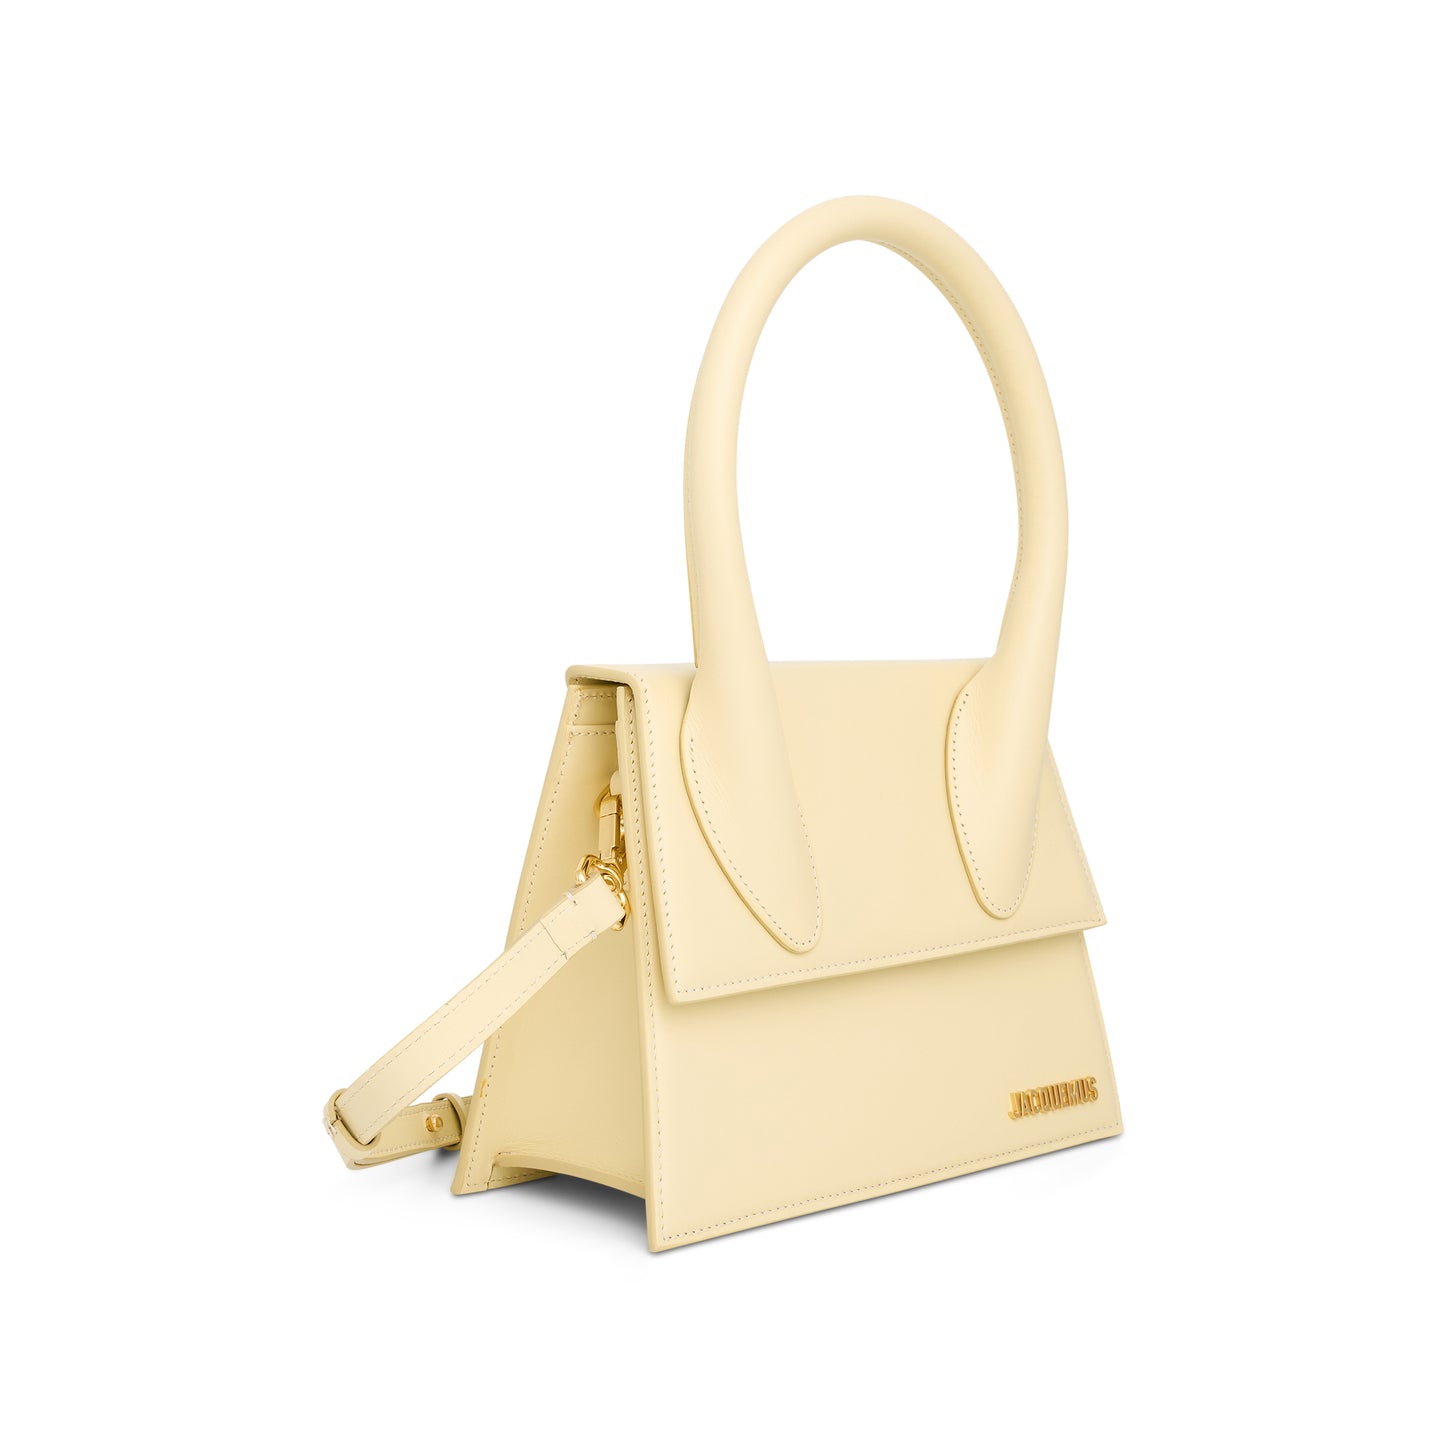 Le Grand Chiquito Leather Bag in Ivory